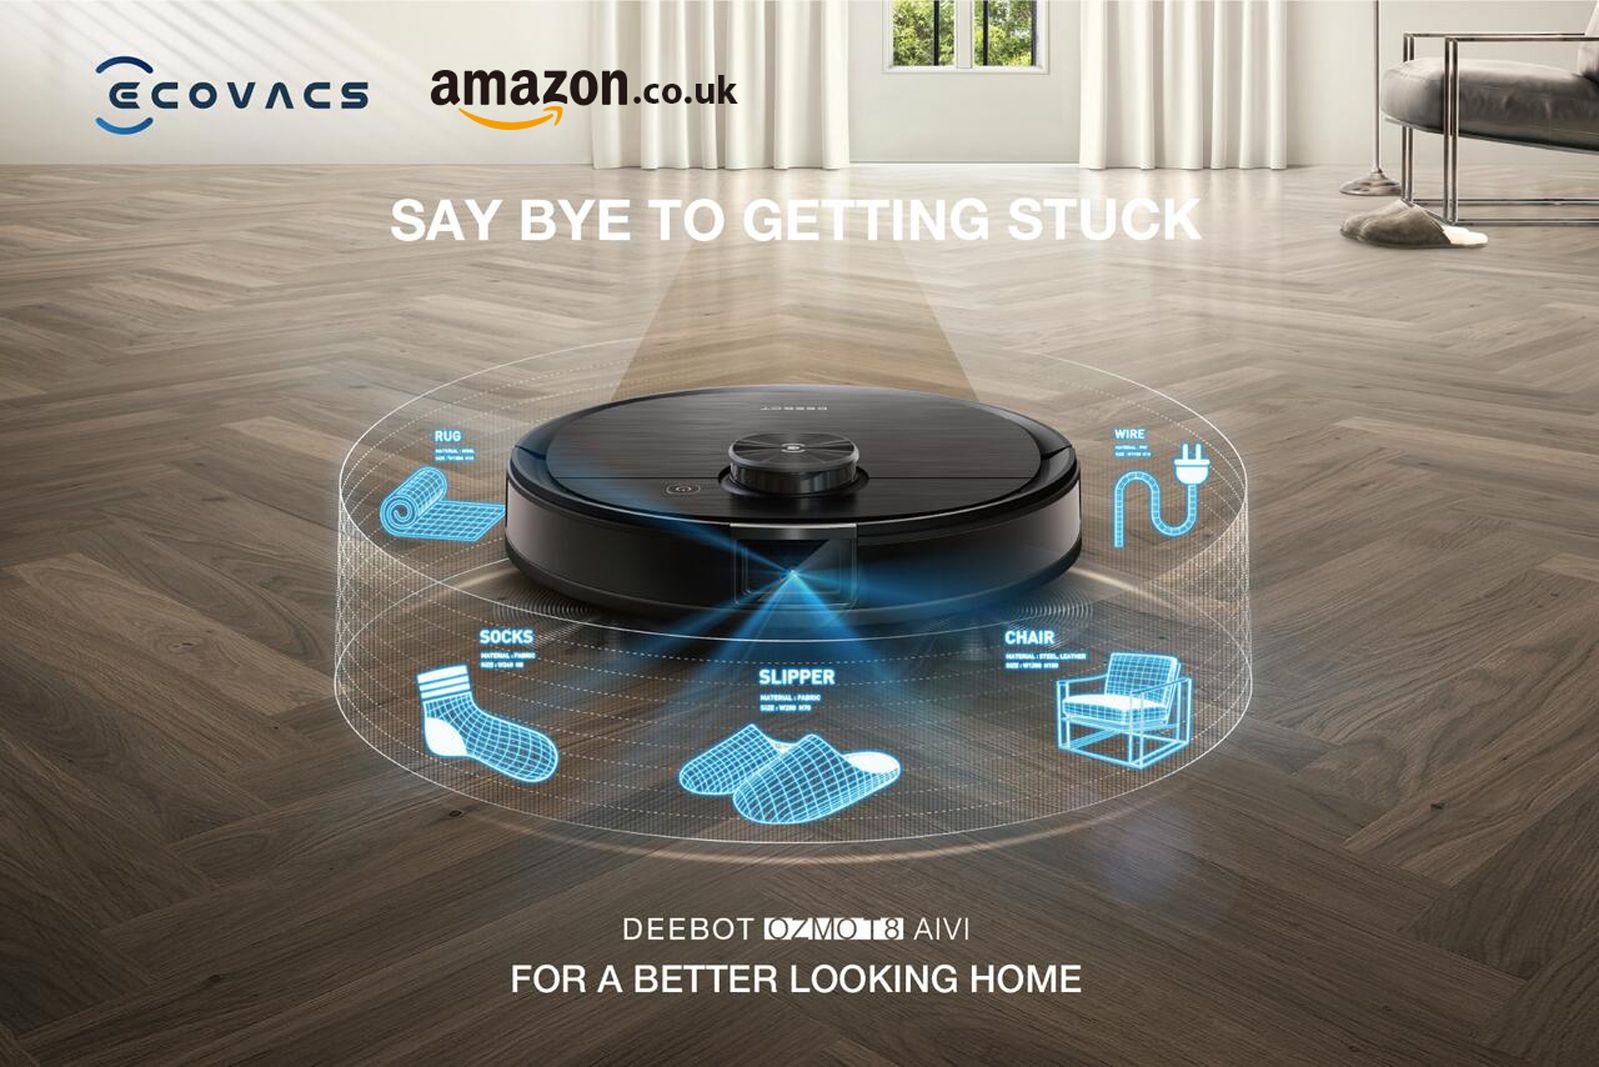 Ecovacs is giving away two top robot vacuums for Christmas Here's how